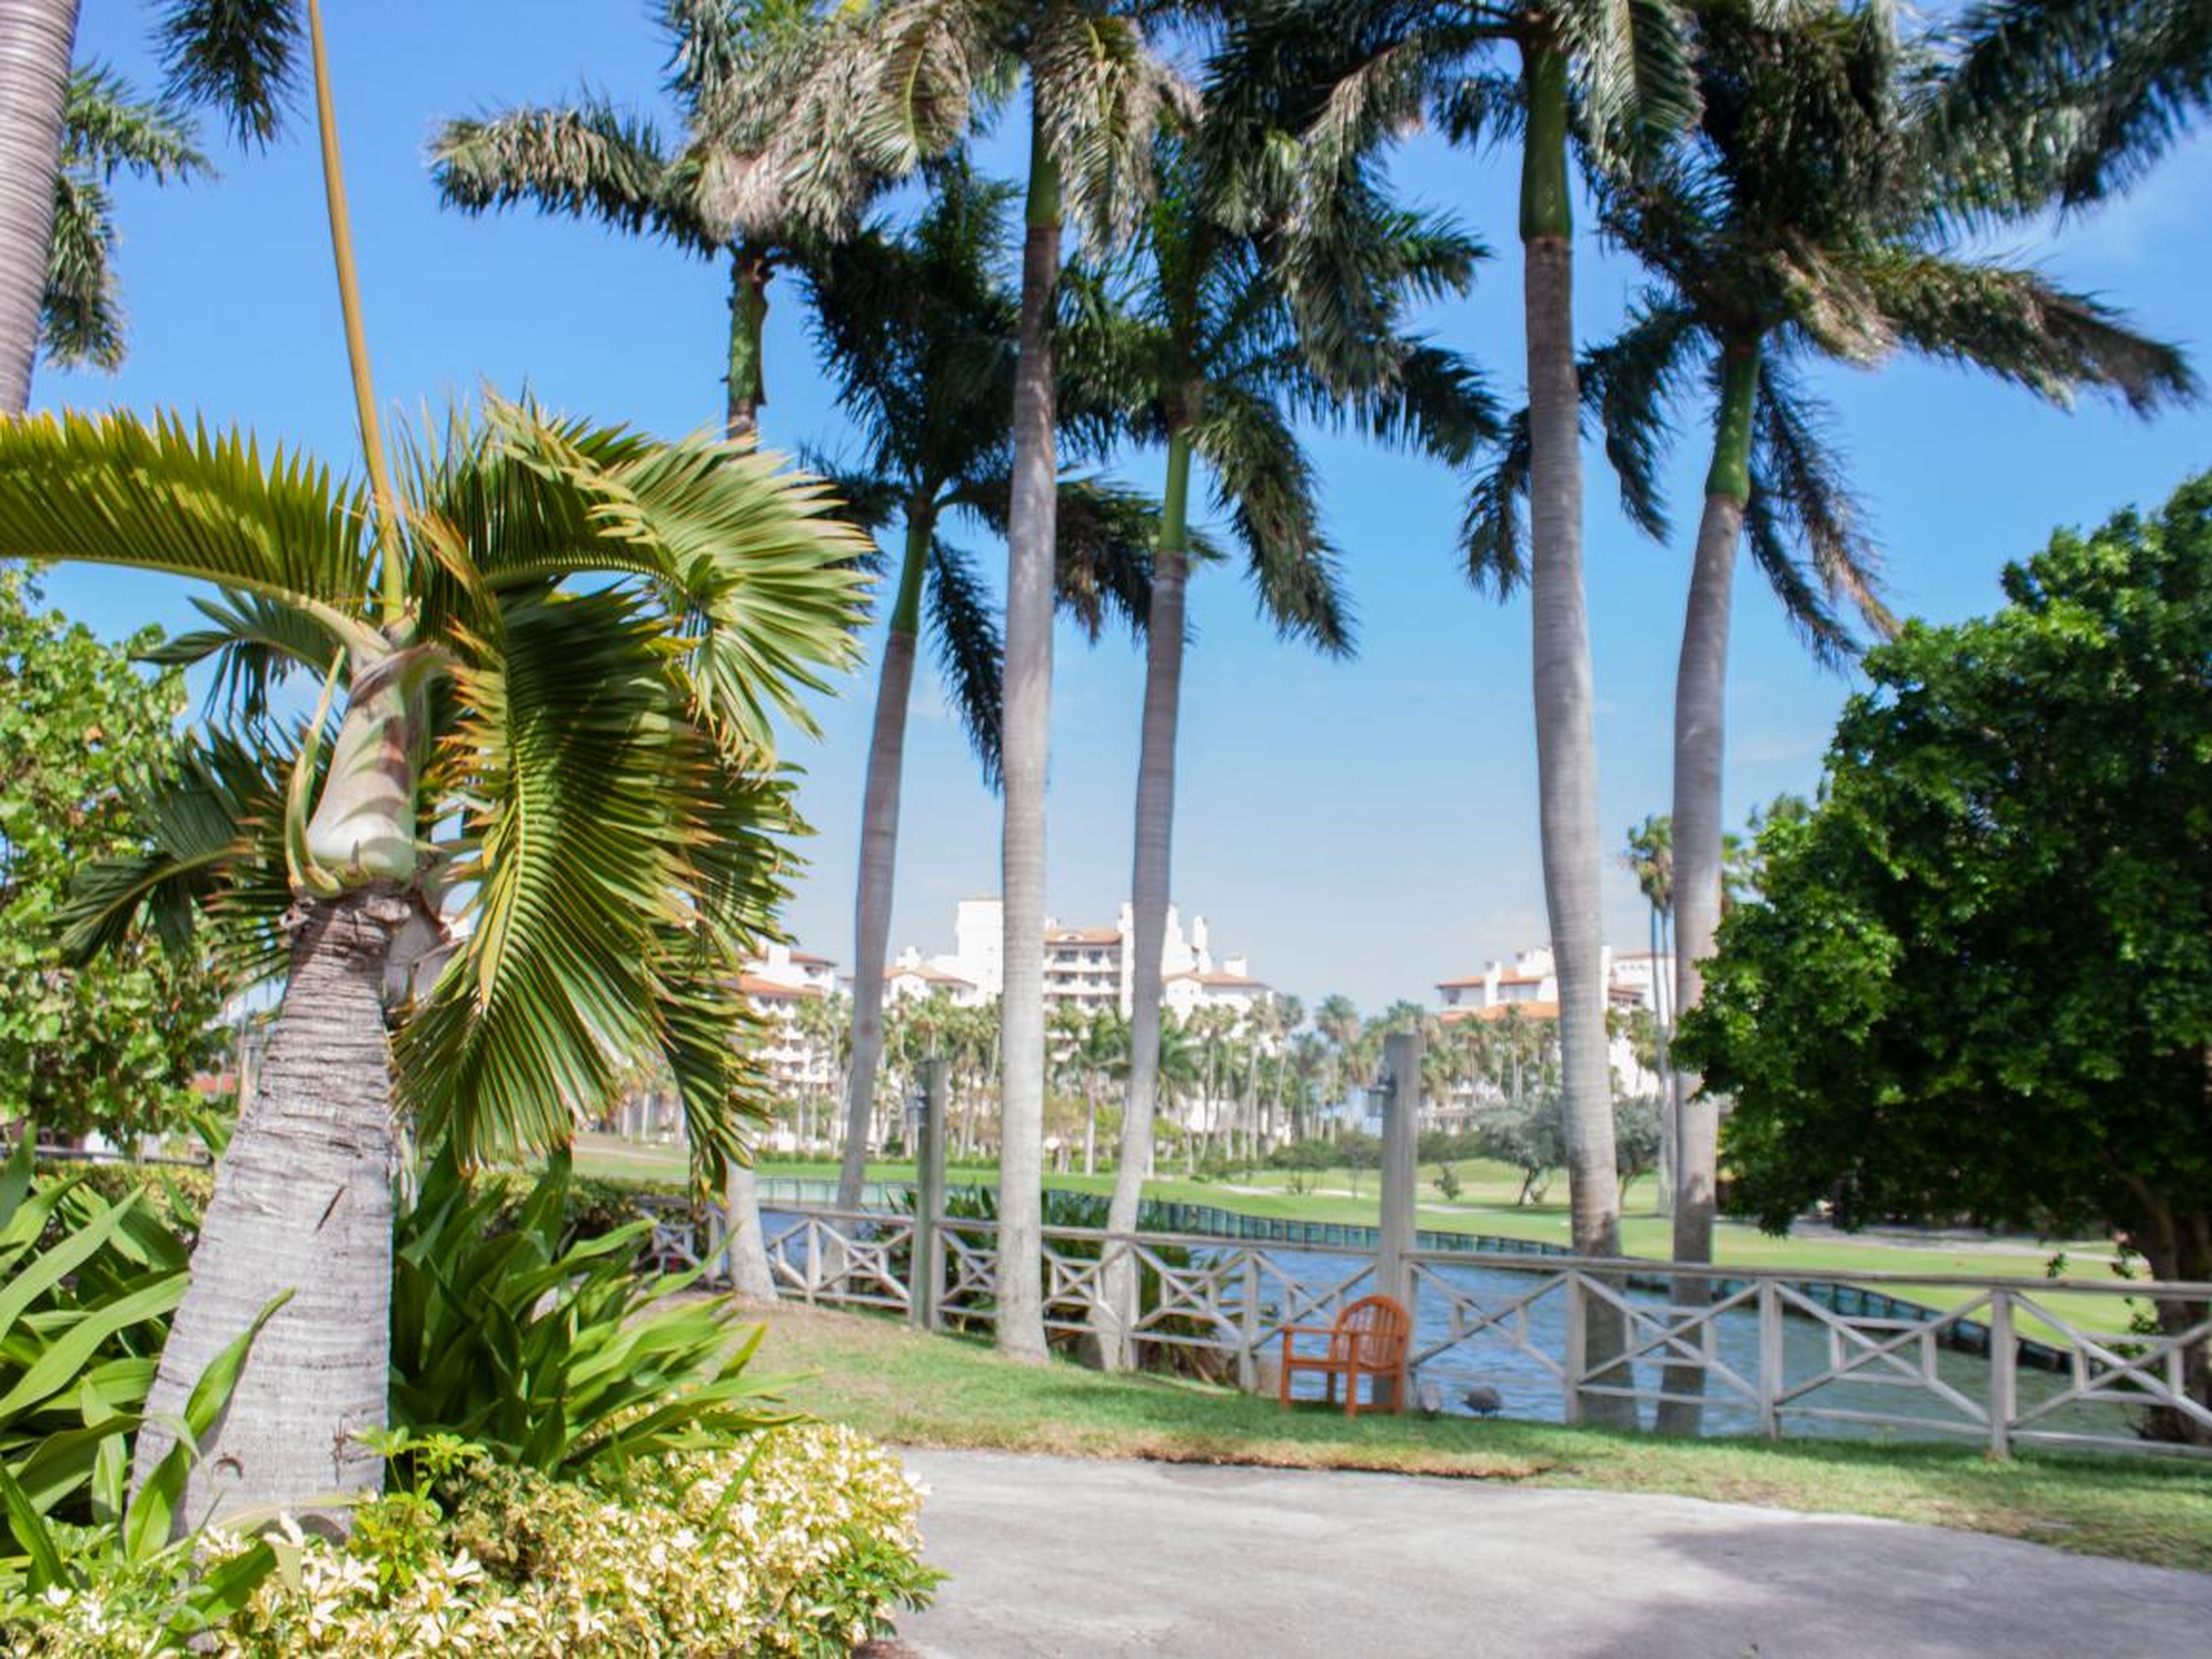 More than 600 employees work on Fisher Island, including the Club workers and employees of the homeowner association and property management employees.